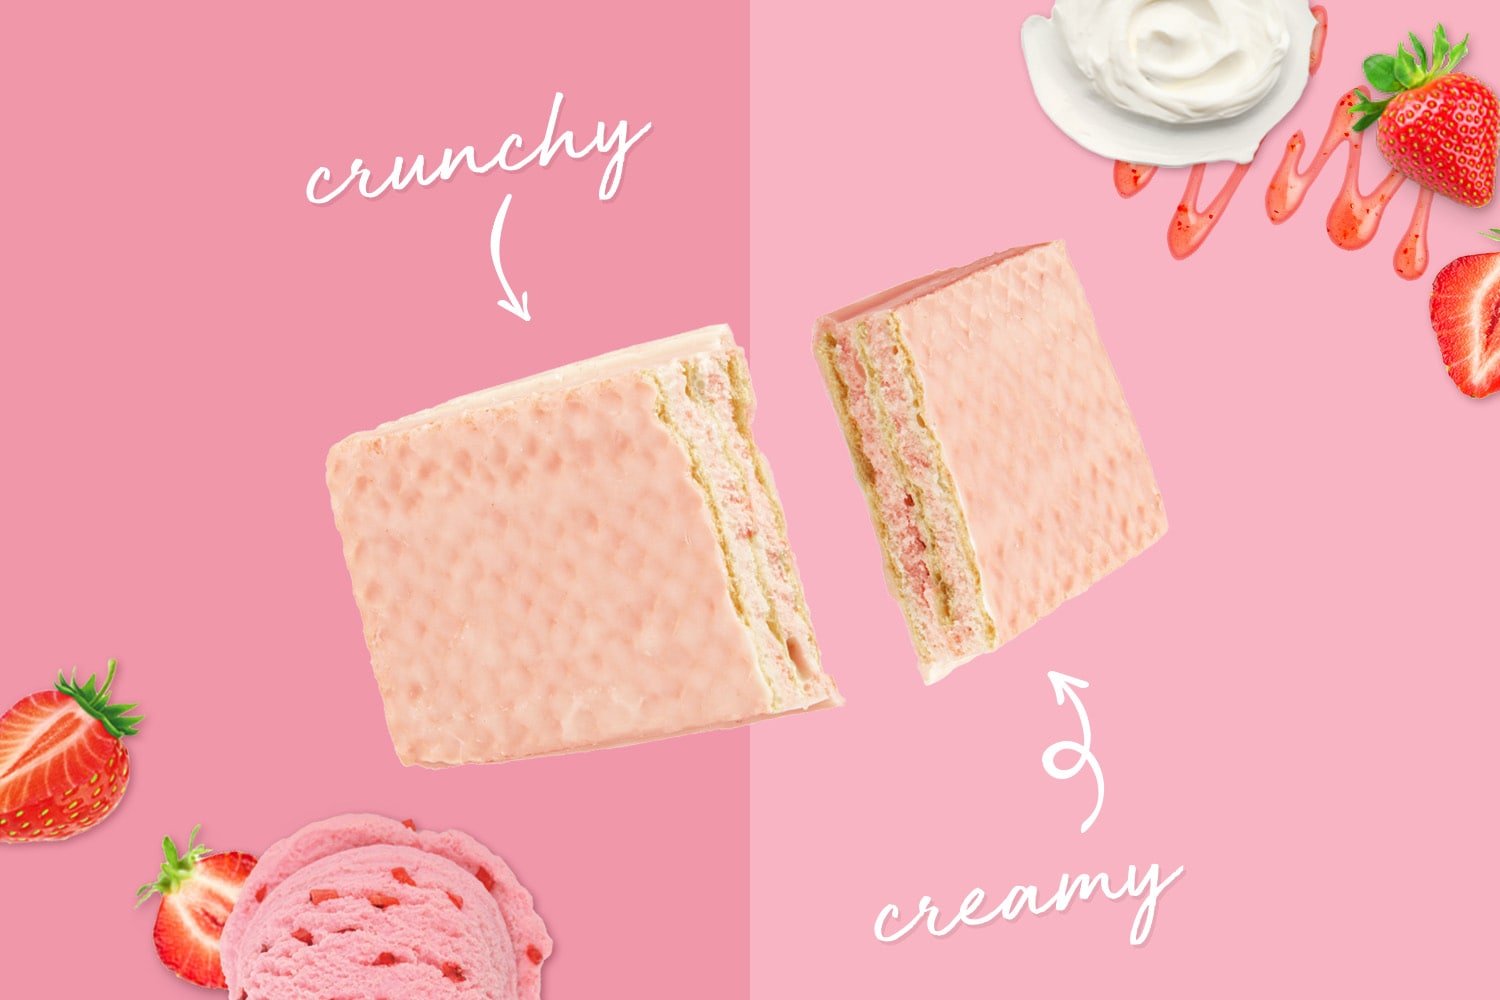 Creamy and crunchy wafer protein bars in PRO Strawberry